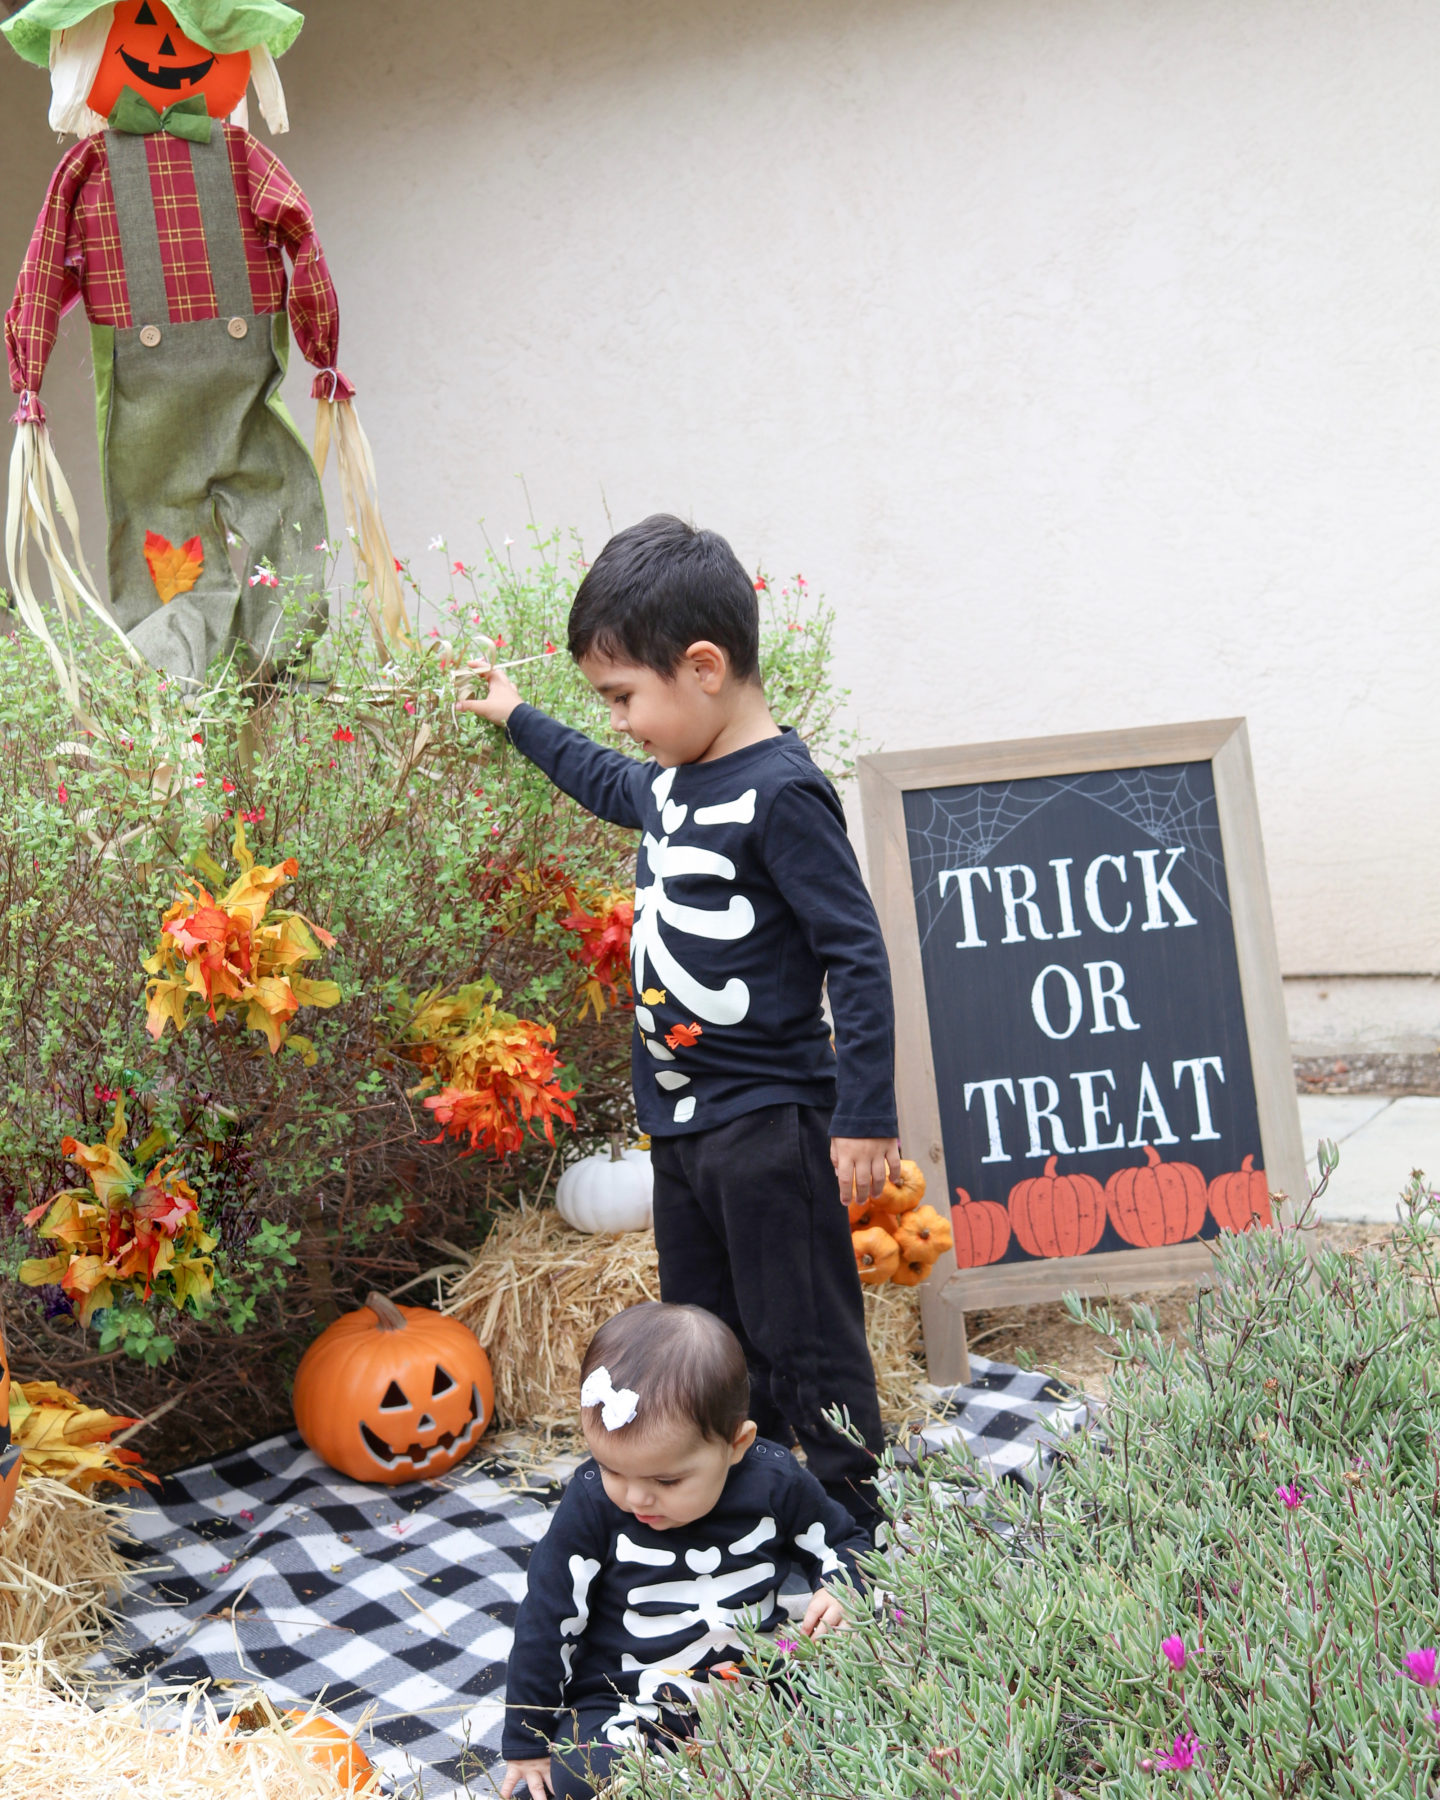 Trick or Treat sign, Halloween Yard decor, Kids Halloween Outfits